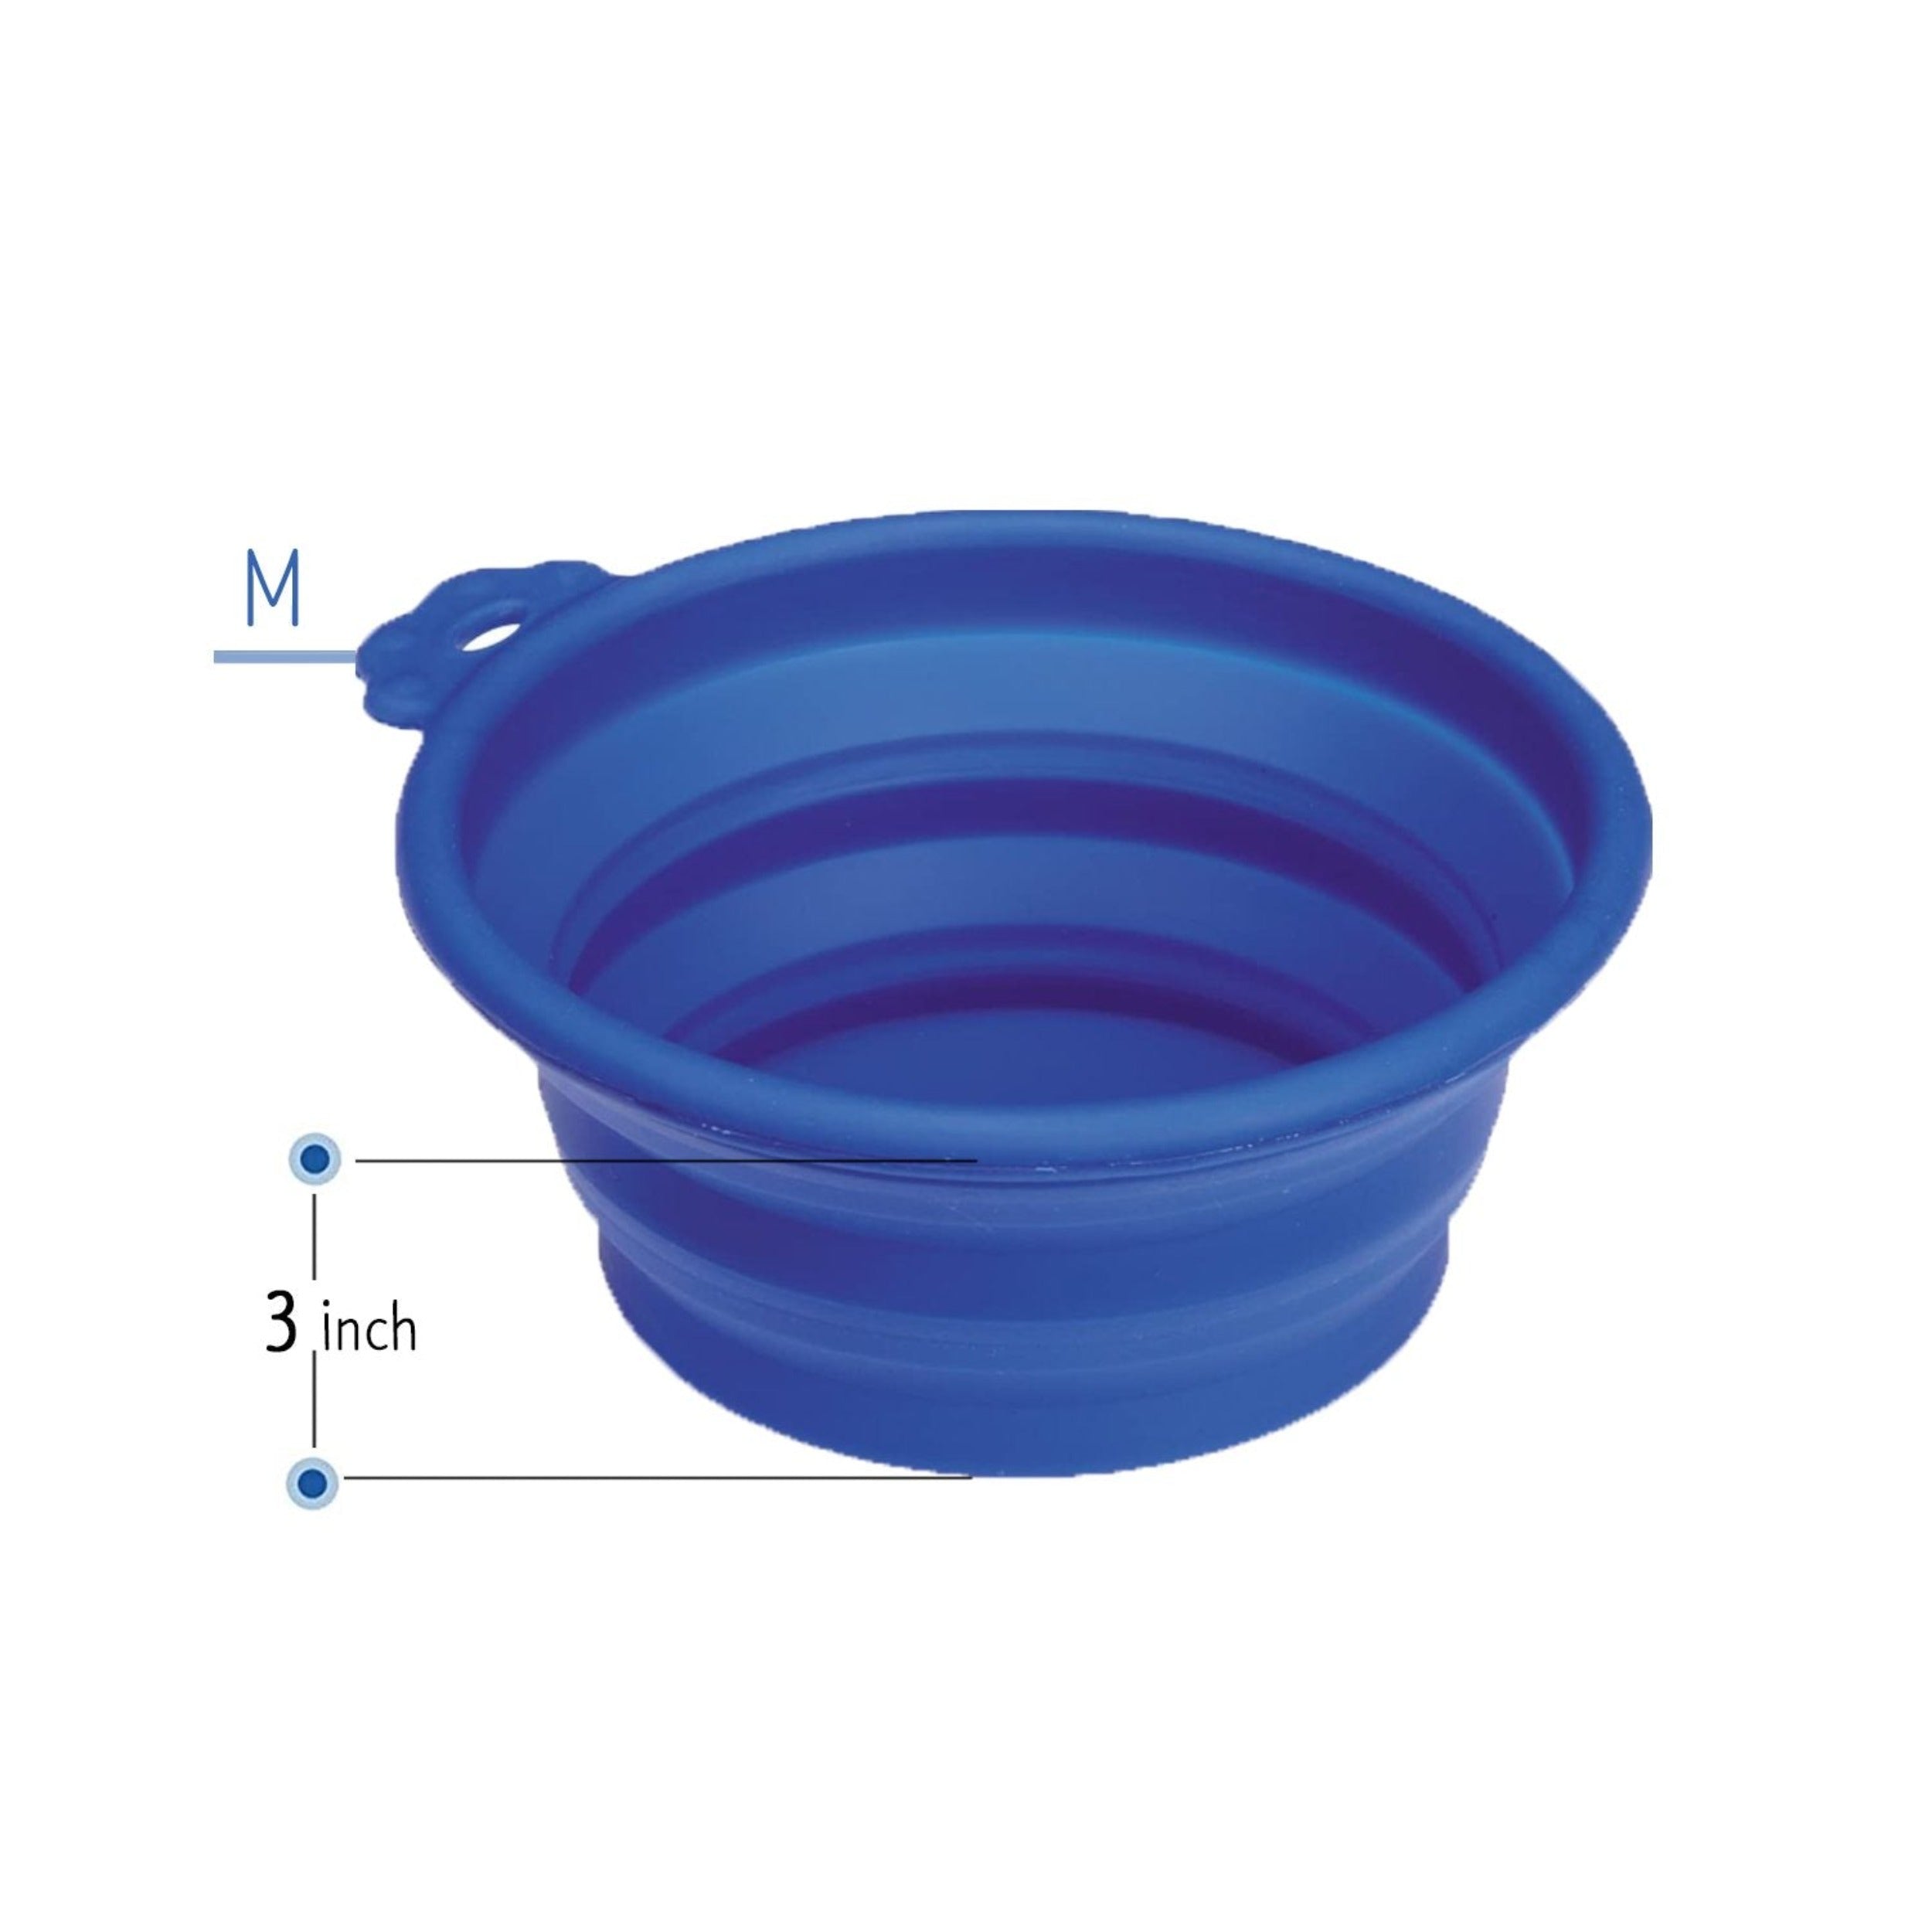 Guardian Gear Bend-A-Bowl In 4 Colors